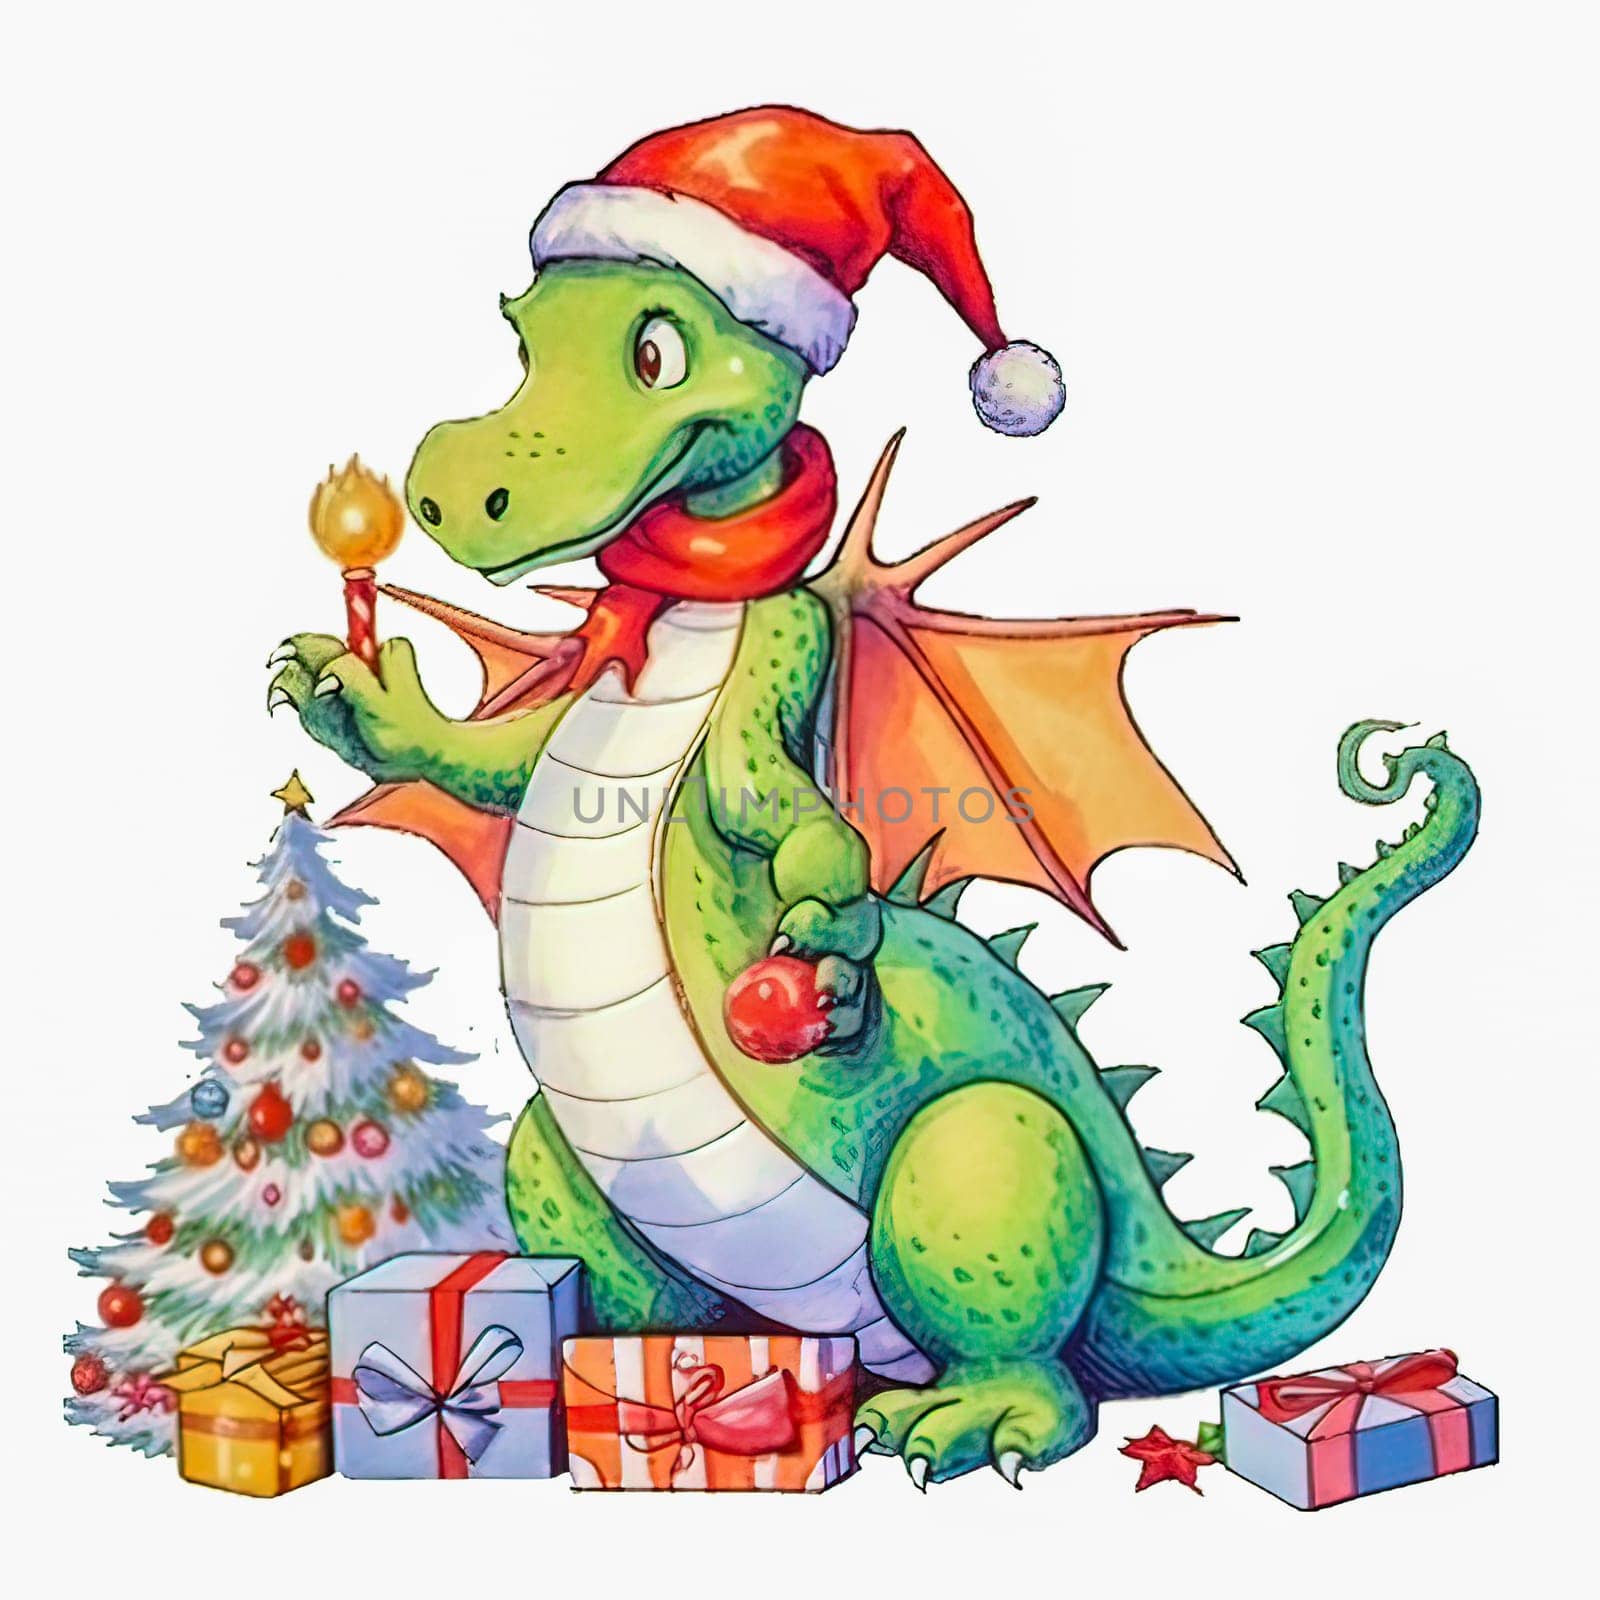 Illustration of a small green dragon in a red cap with a Christmas tree and presents on a white background. Year of the dragon. New Year illustration. High quality illustration